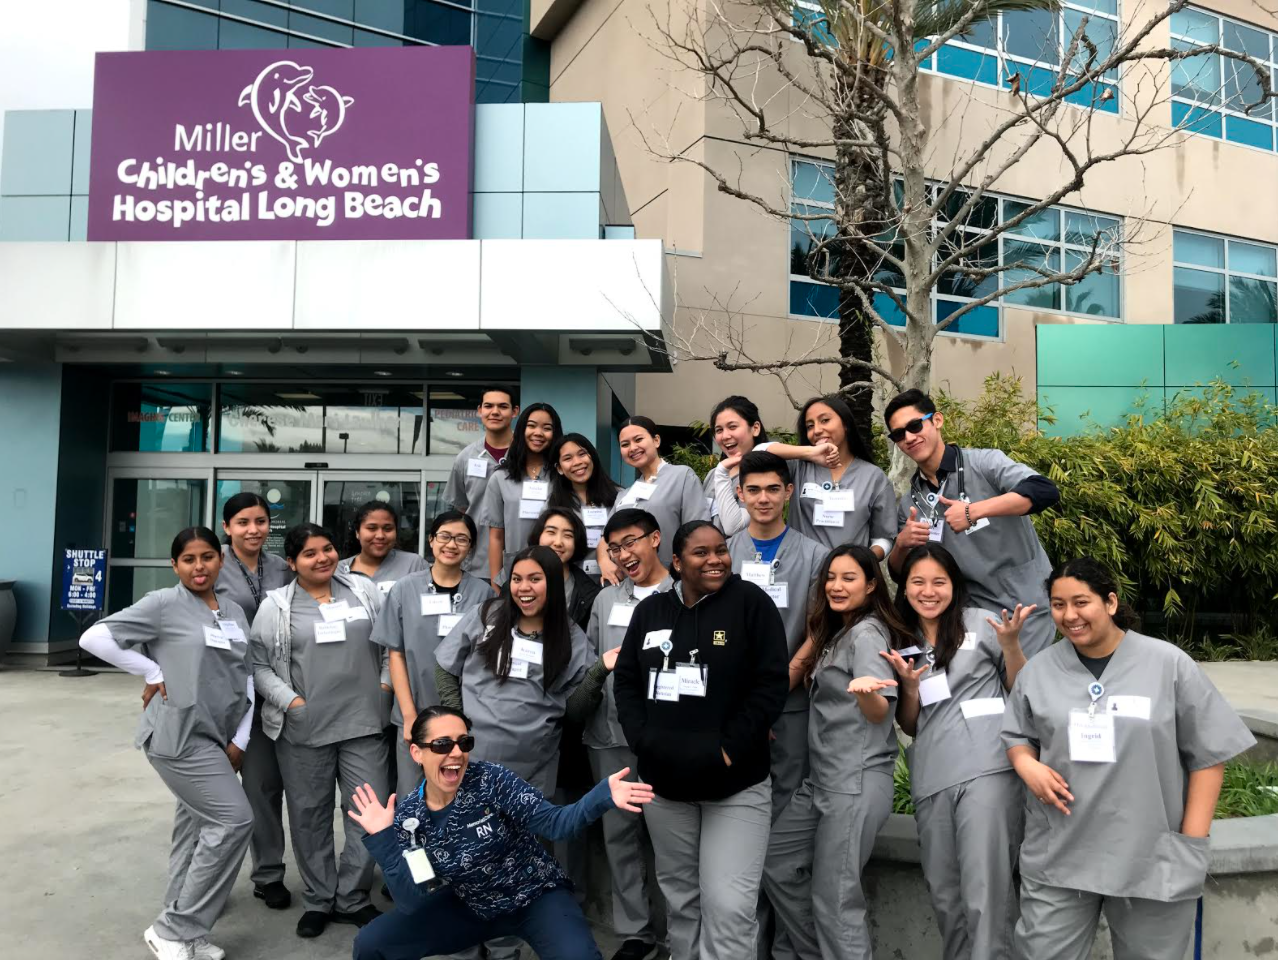 Gerard in the Spring 2018 cohort of the Long Beach Memorial Healthcare simulation.